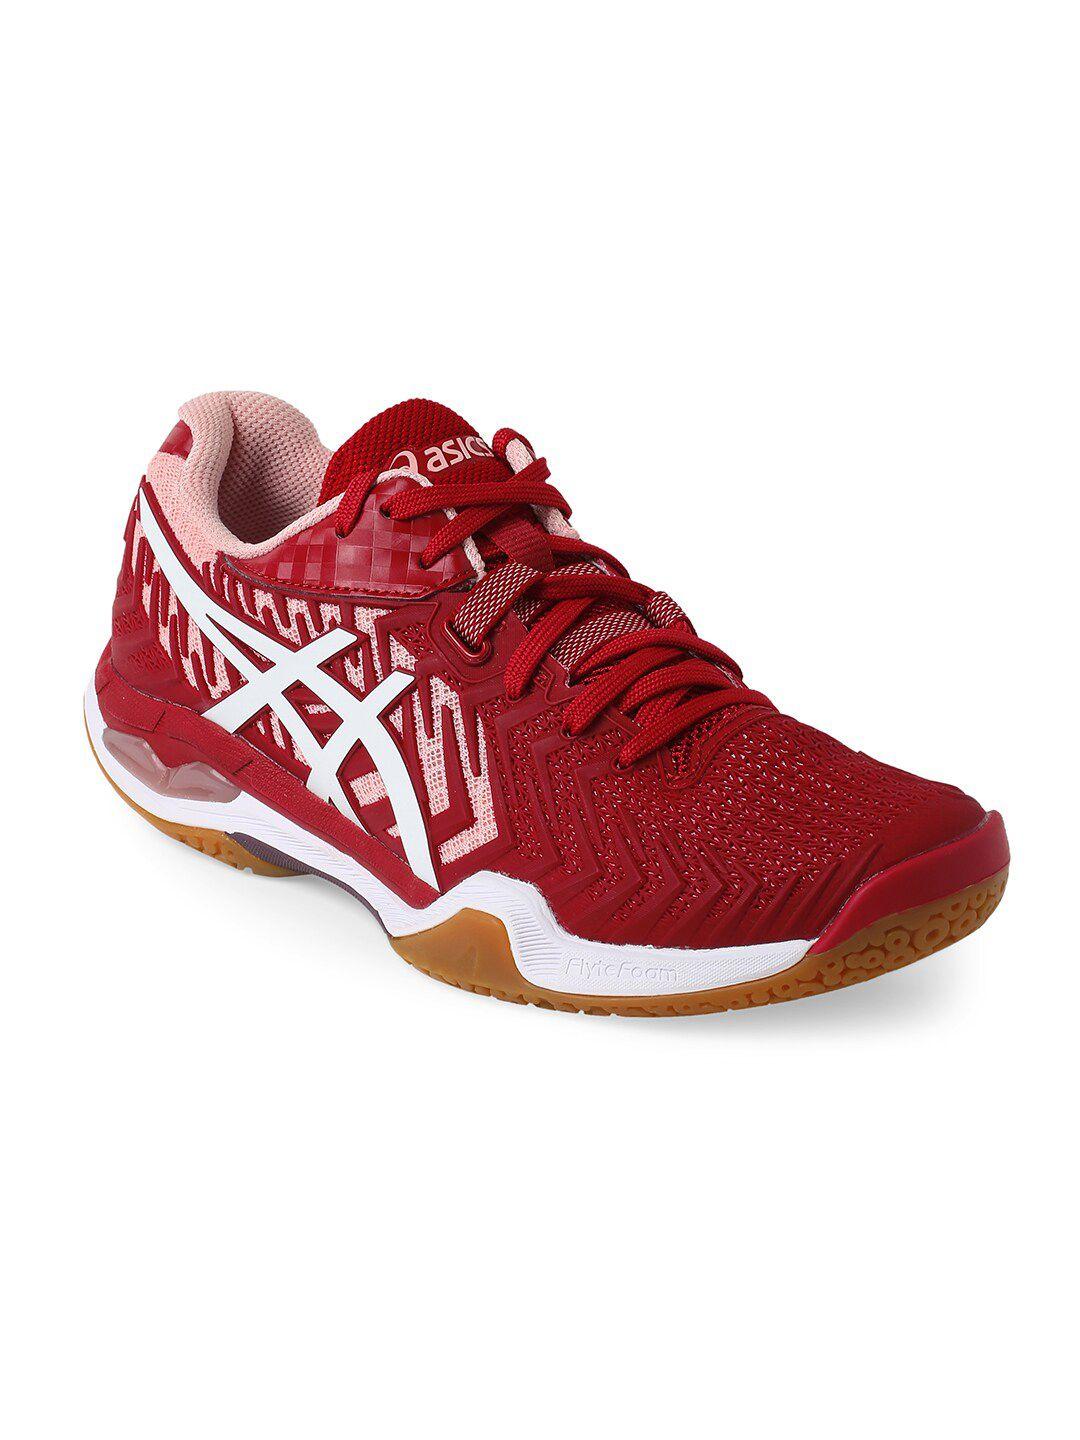 asics-women-red-court-control-ff-2-badminton-non-marking-shoes